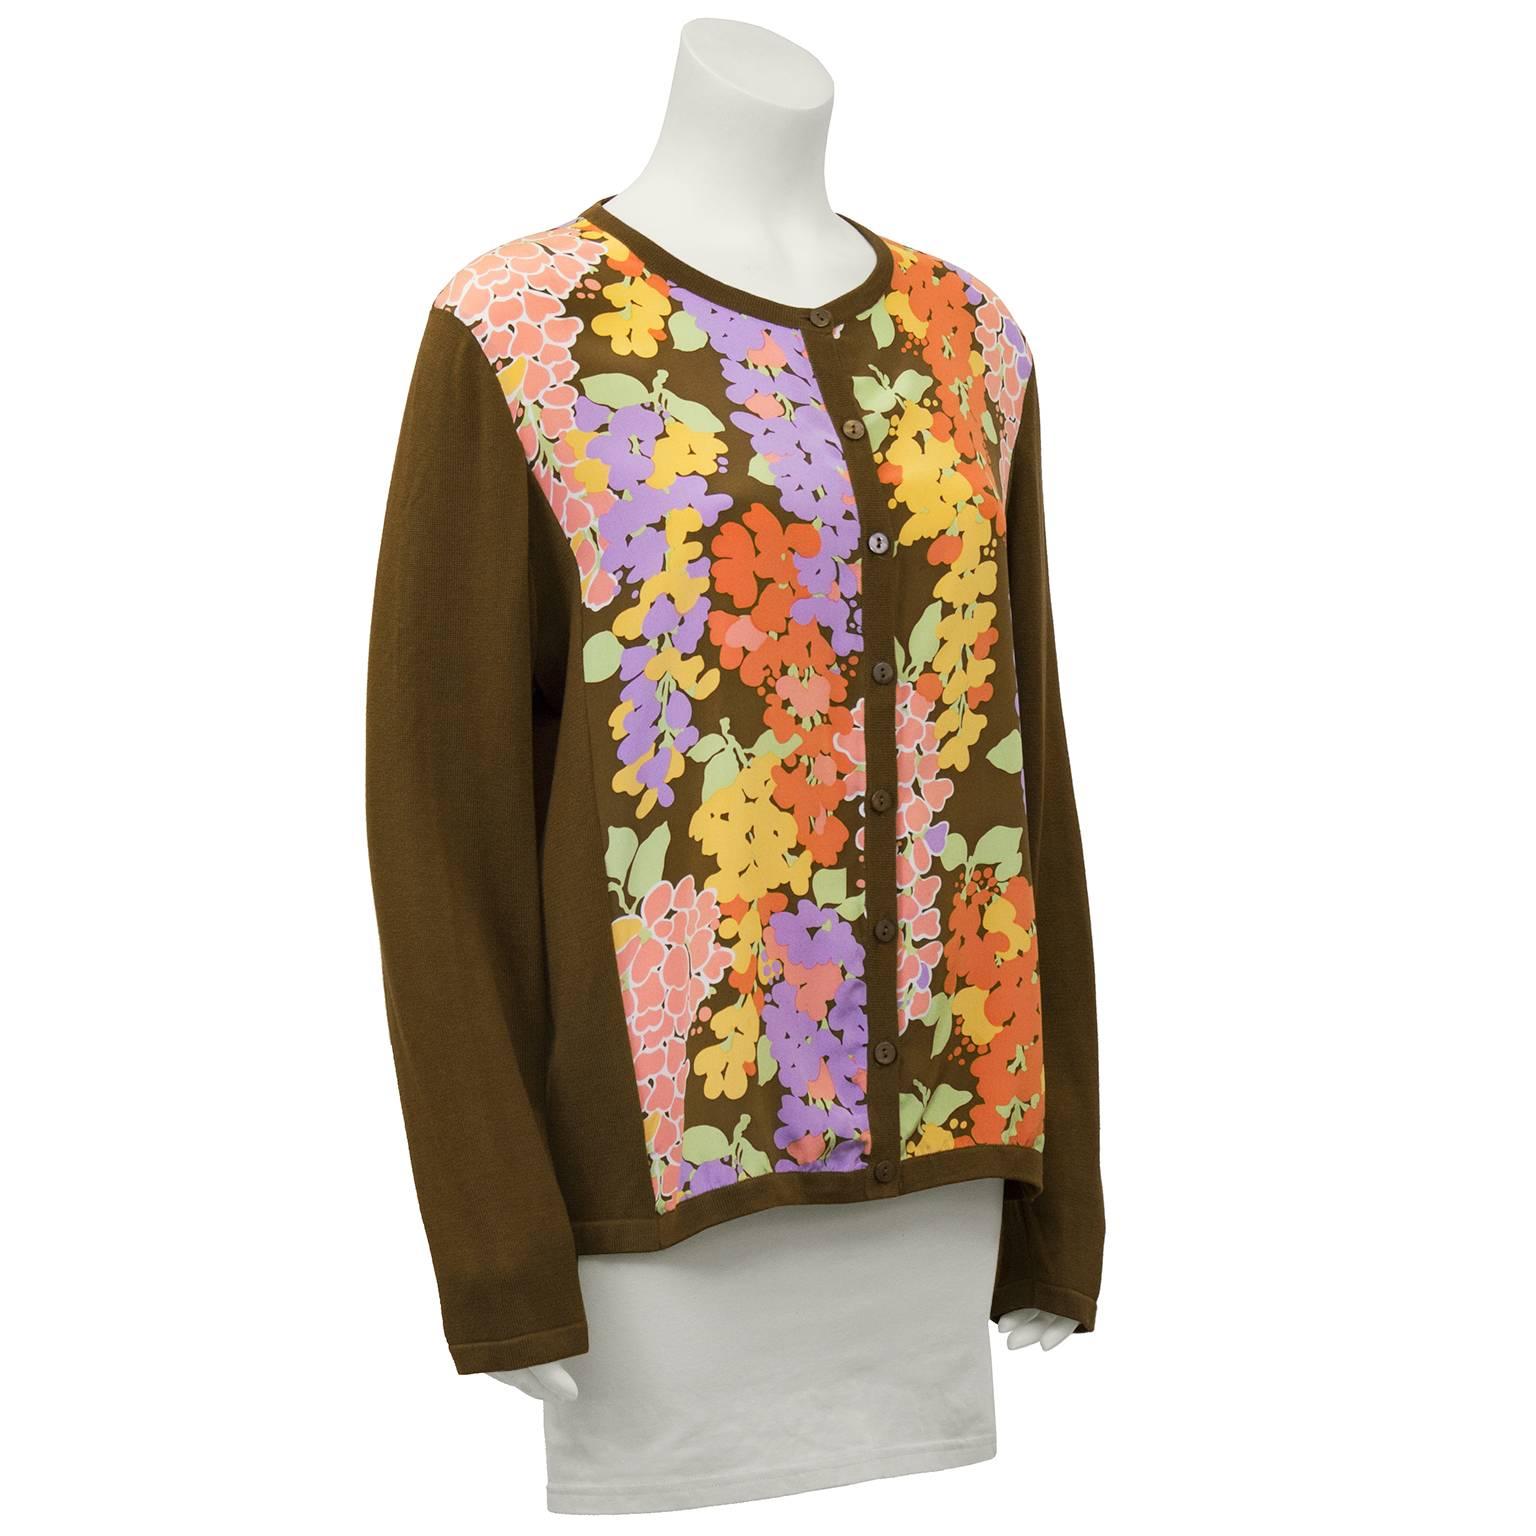 1980s Bob Mackie Wearable Art cardigan. Brown cotton knit sleeves, with a silk body featuring a colorful floral print. Interesting departure from the iconic embellished Bob Mackie gowns. Excellent vintage condition. Fits like a US 8. 

Sleeve